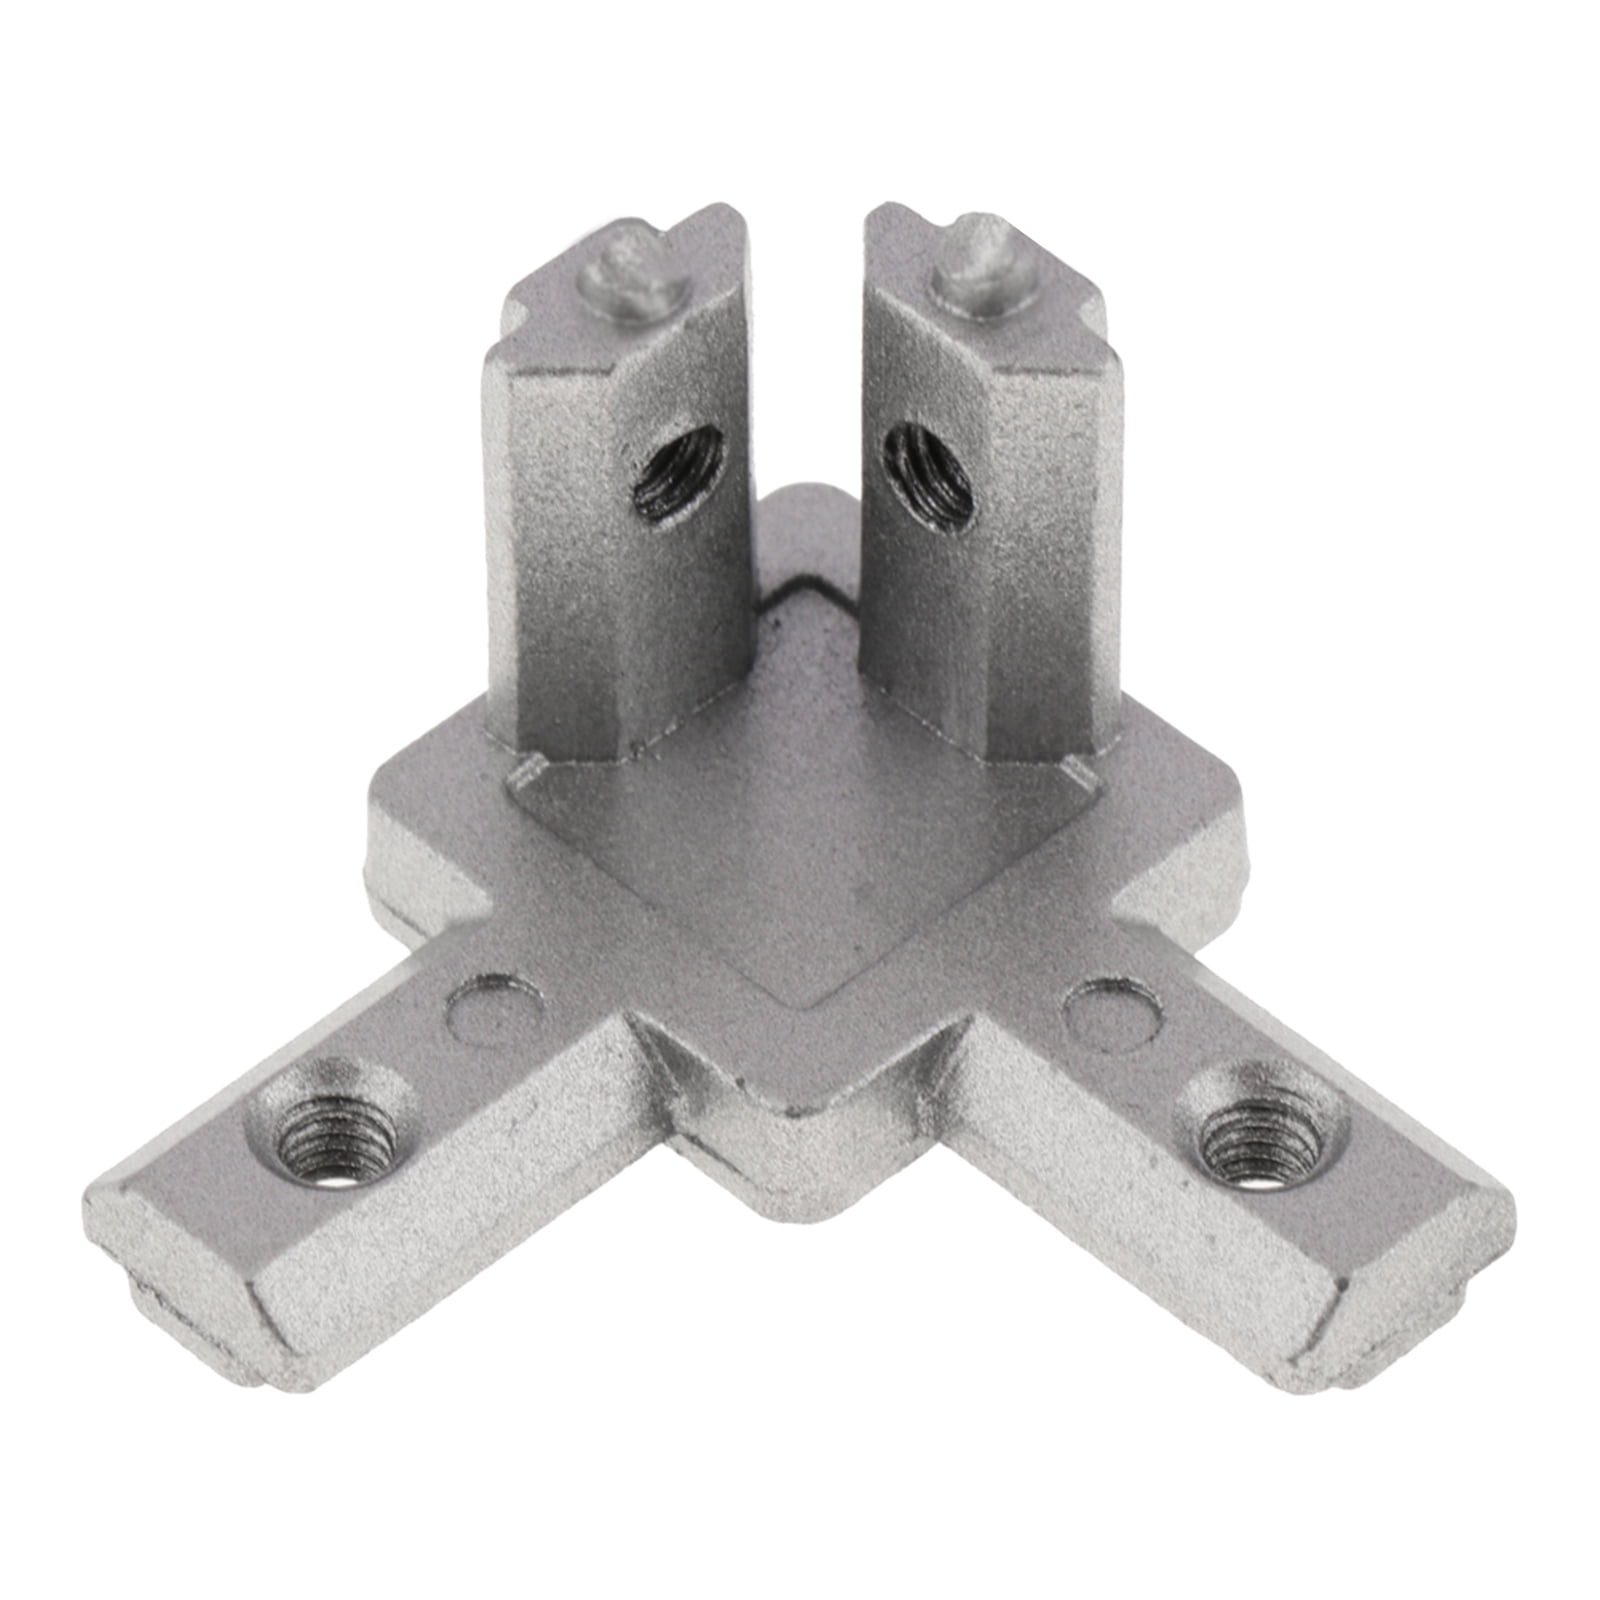 Details about   8 Pcs 3 Way Interior Connector Joint Bracket Fitting for Aluminum Profile 